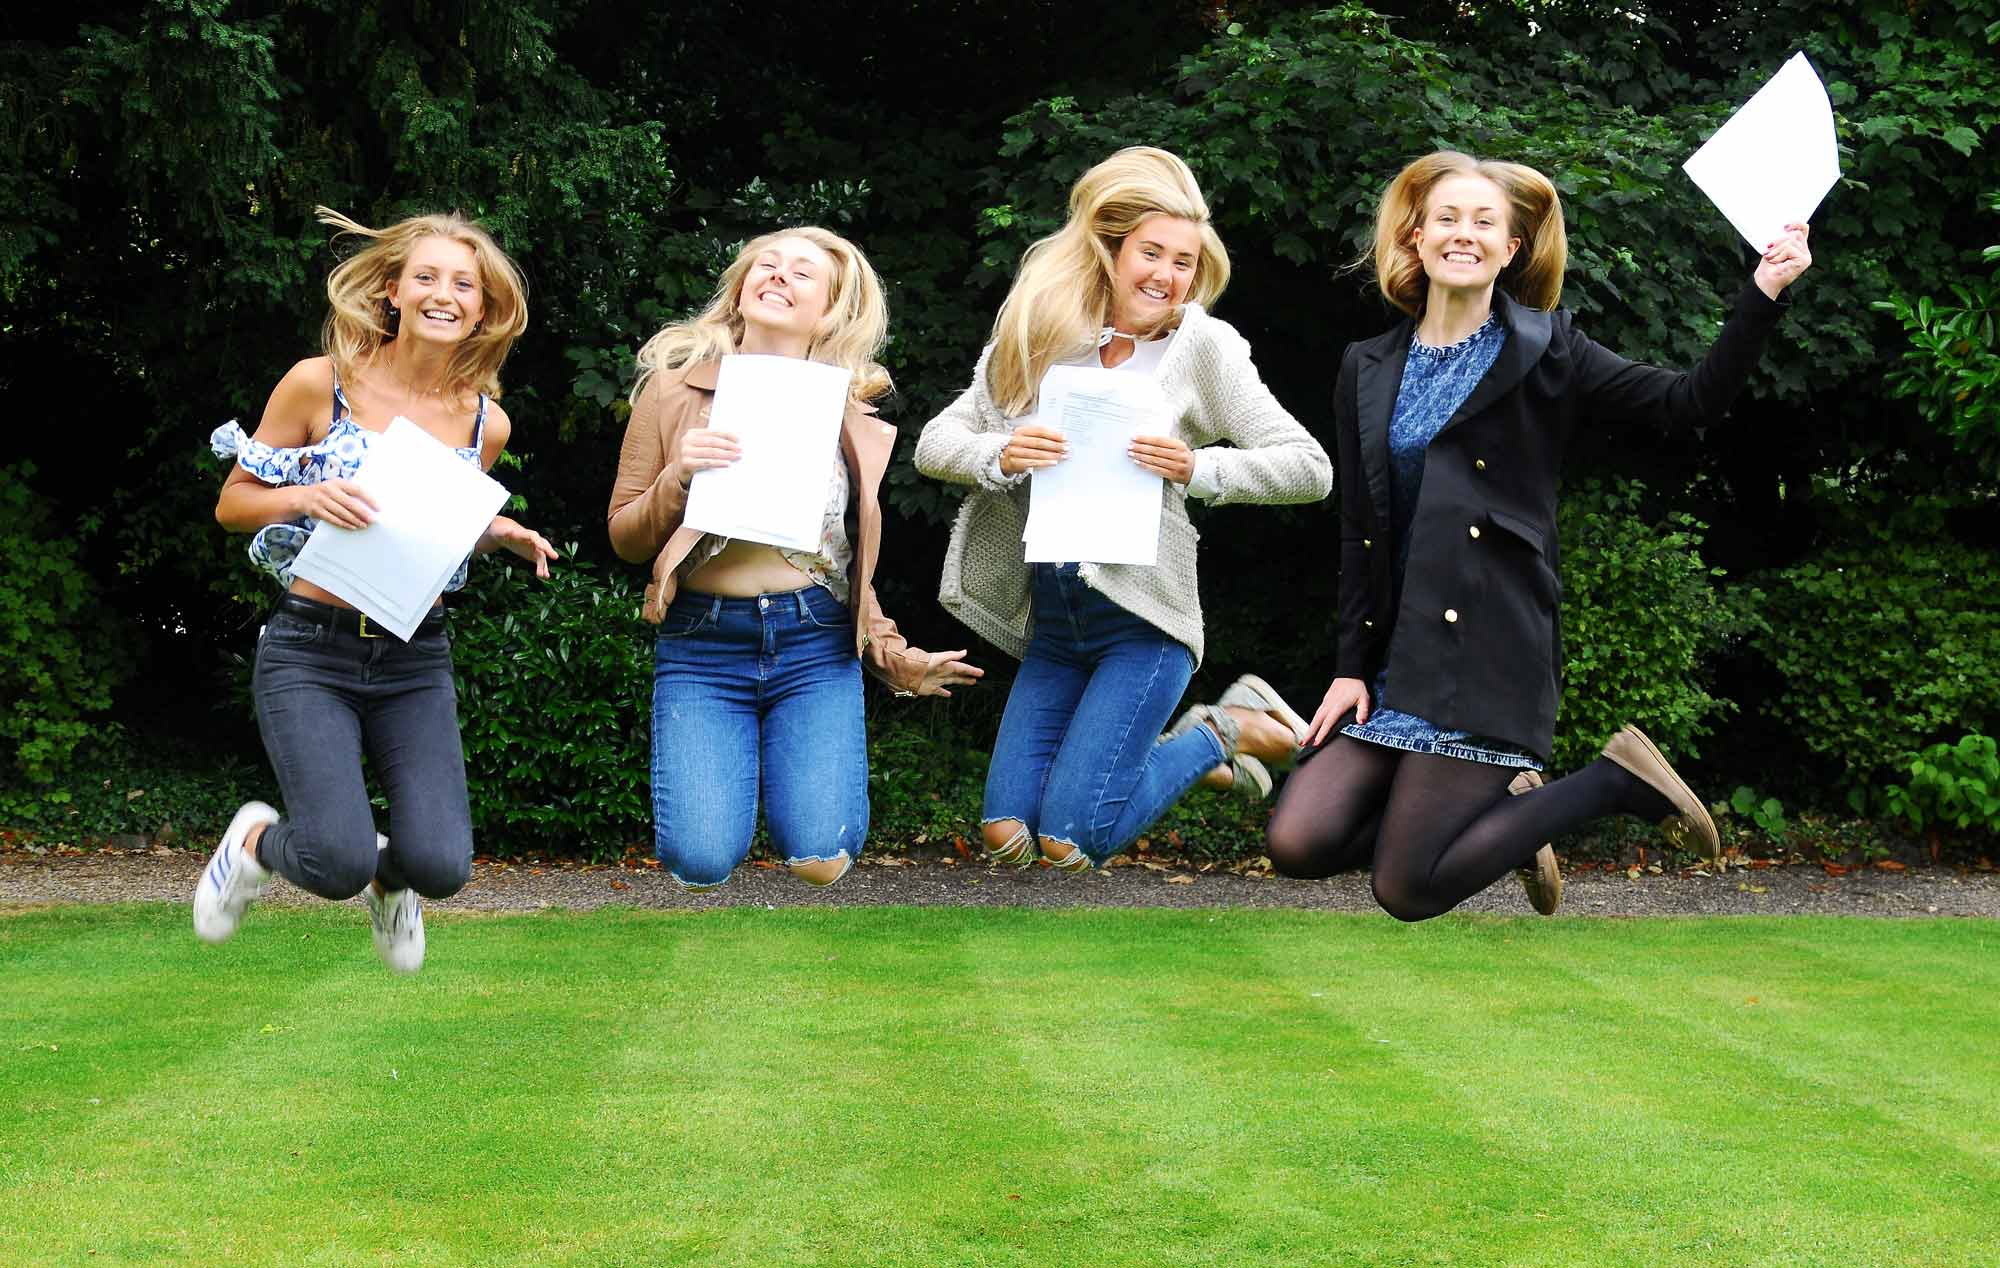 Harrogate Ladies’ College pupils celebrate an impressive set of A level results with the customary jump for joy!